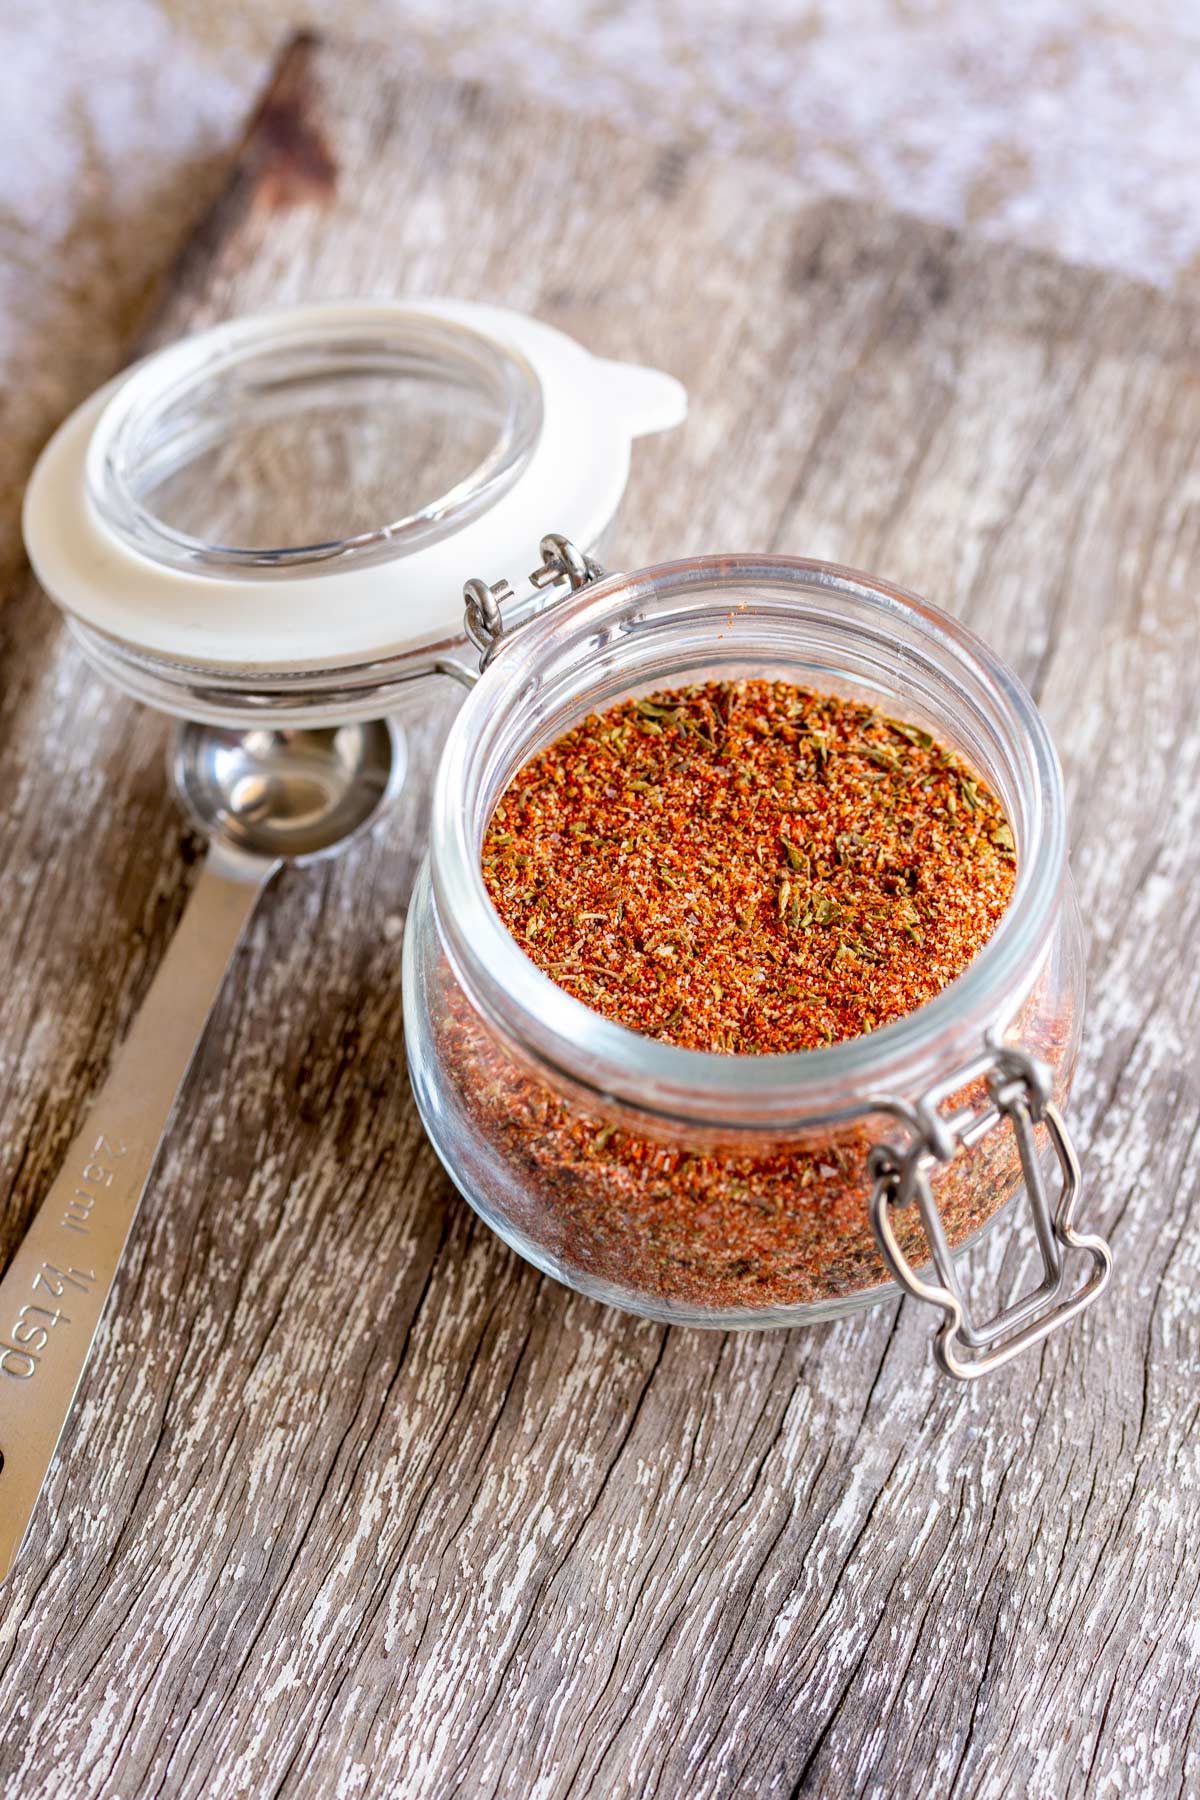 a glass jar with a clip lid. Filled with a blend of seasonings, on a wooden table